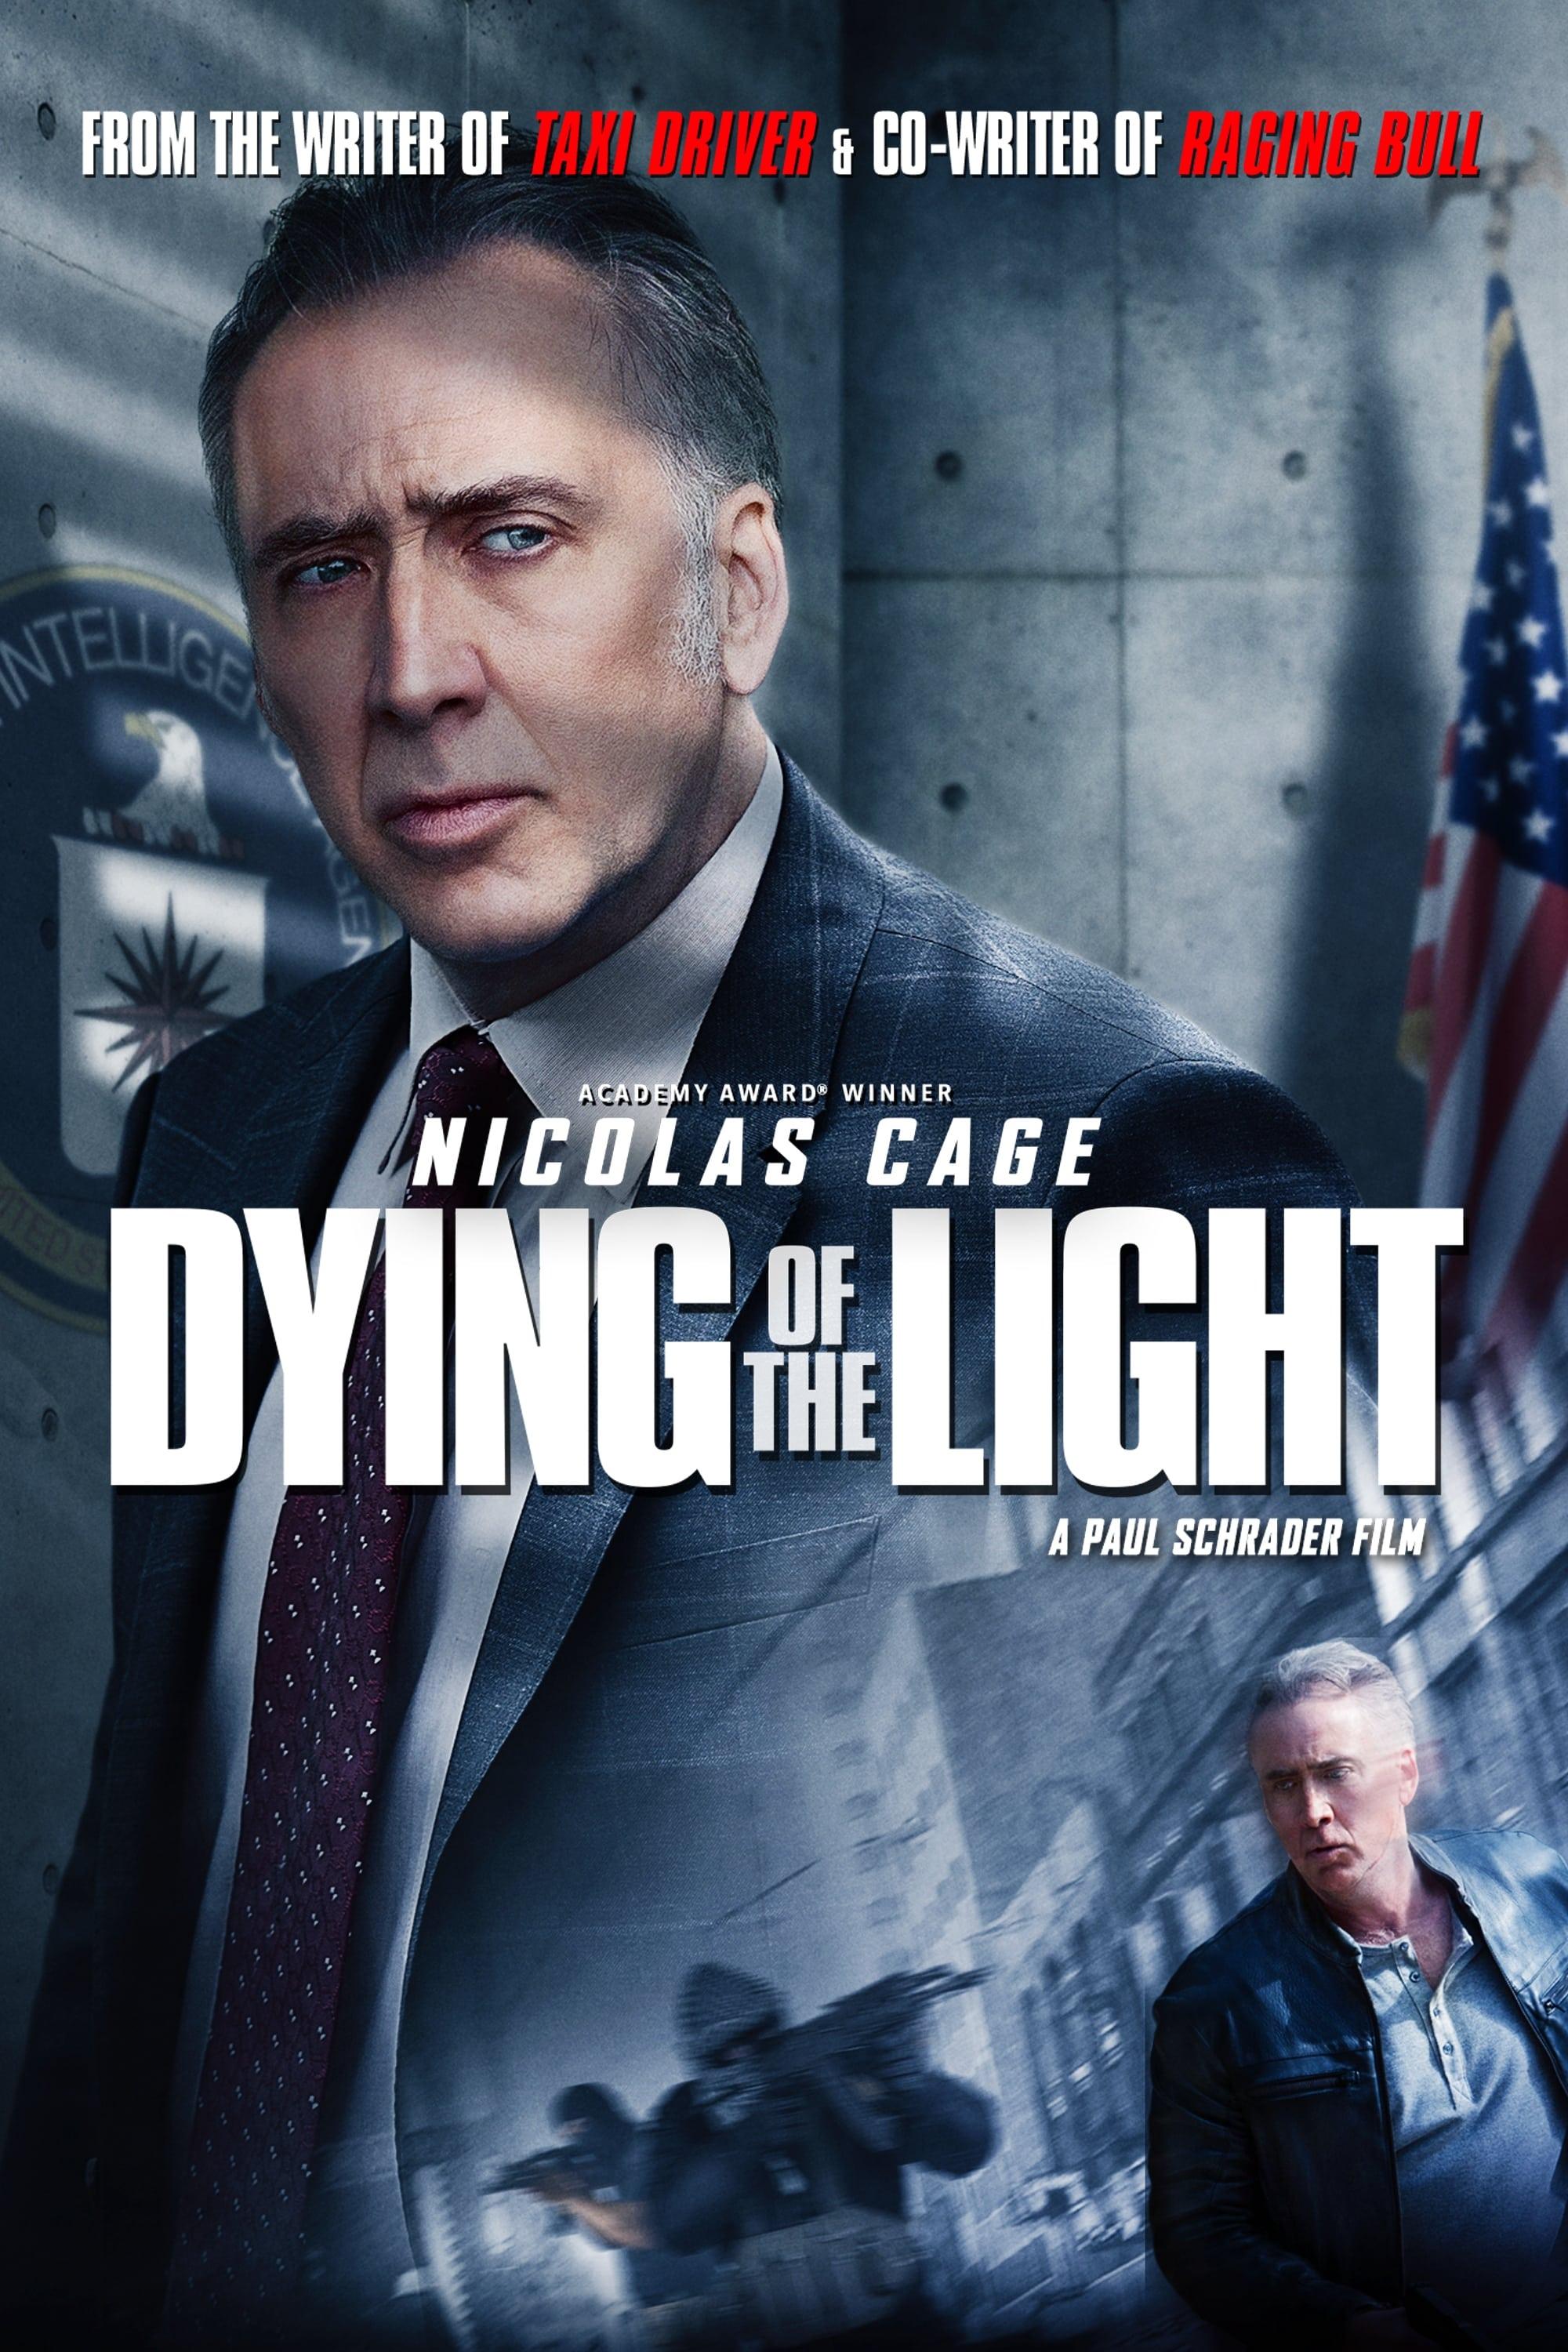 Dying of the Light poster